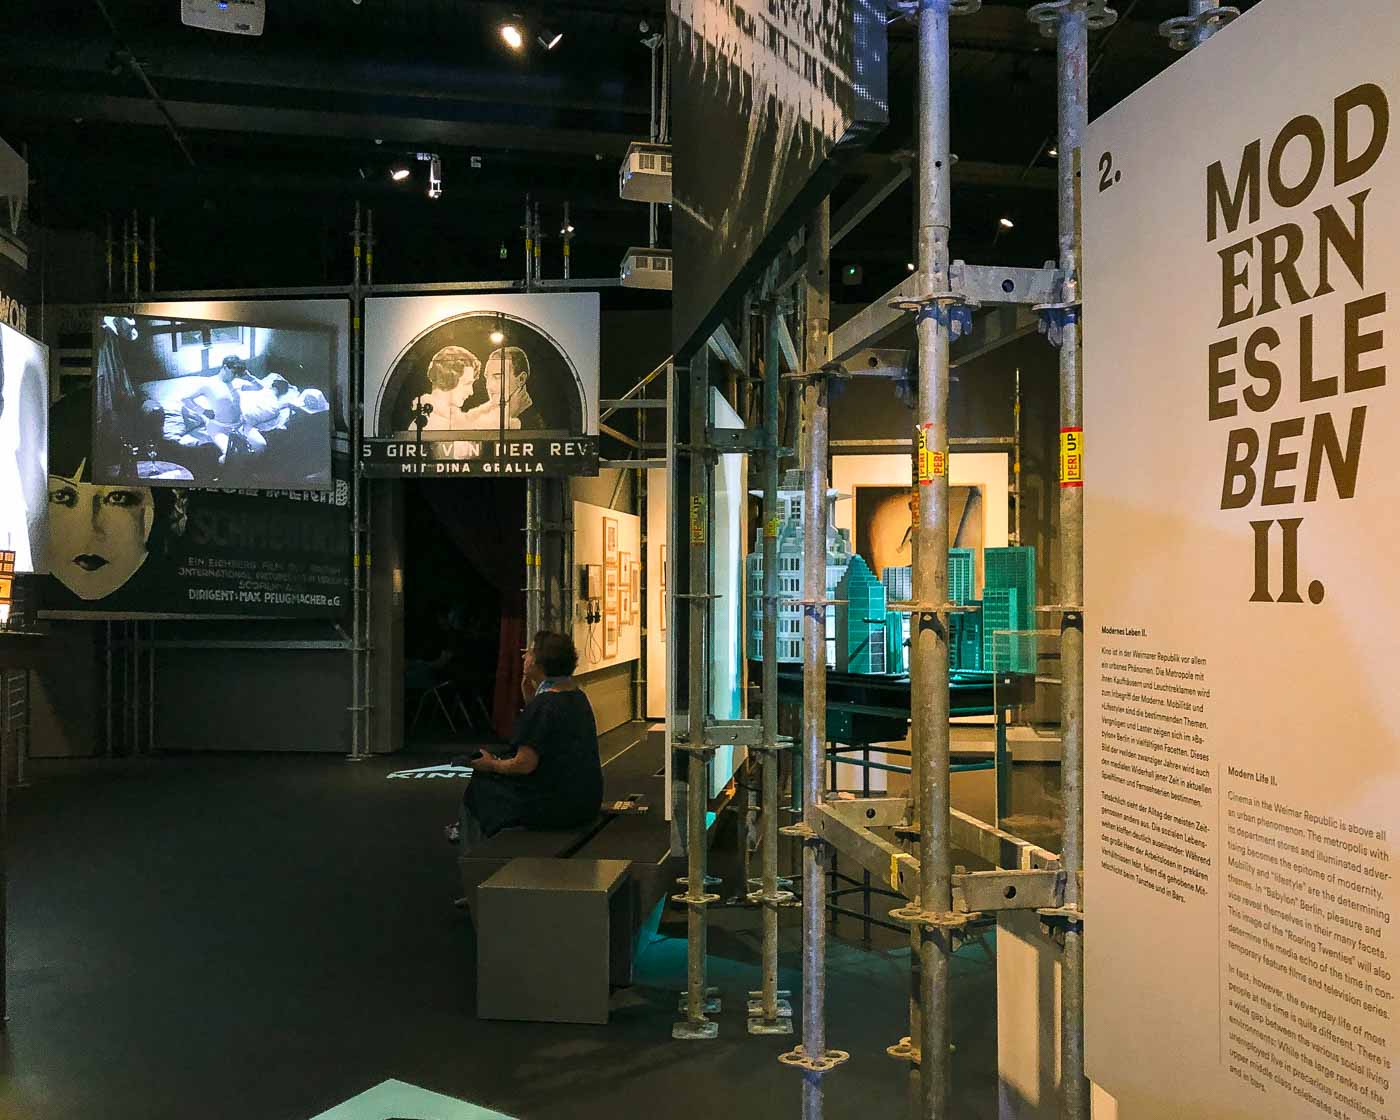 If you love movies and find yourself in Berlin, a trip to the Deutsche Kinemathek, also known as the Berlin Cinema Museum, is an absolute must. Discover the magic of German film and television history at this extraordinary museum in Potsdamer Platz.